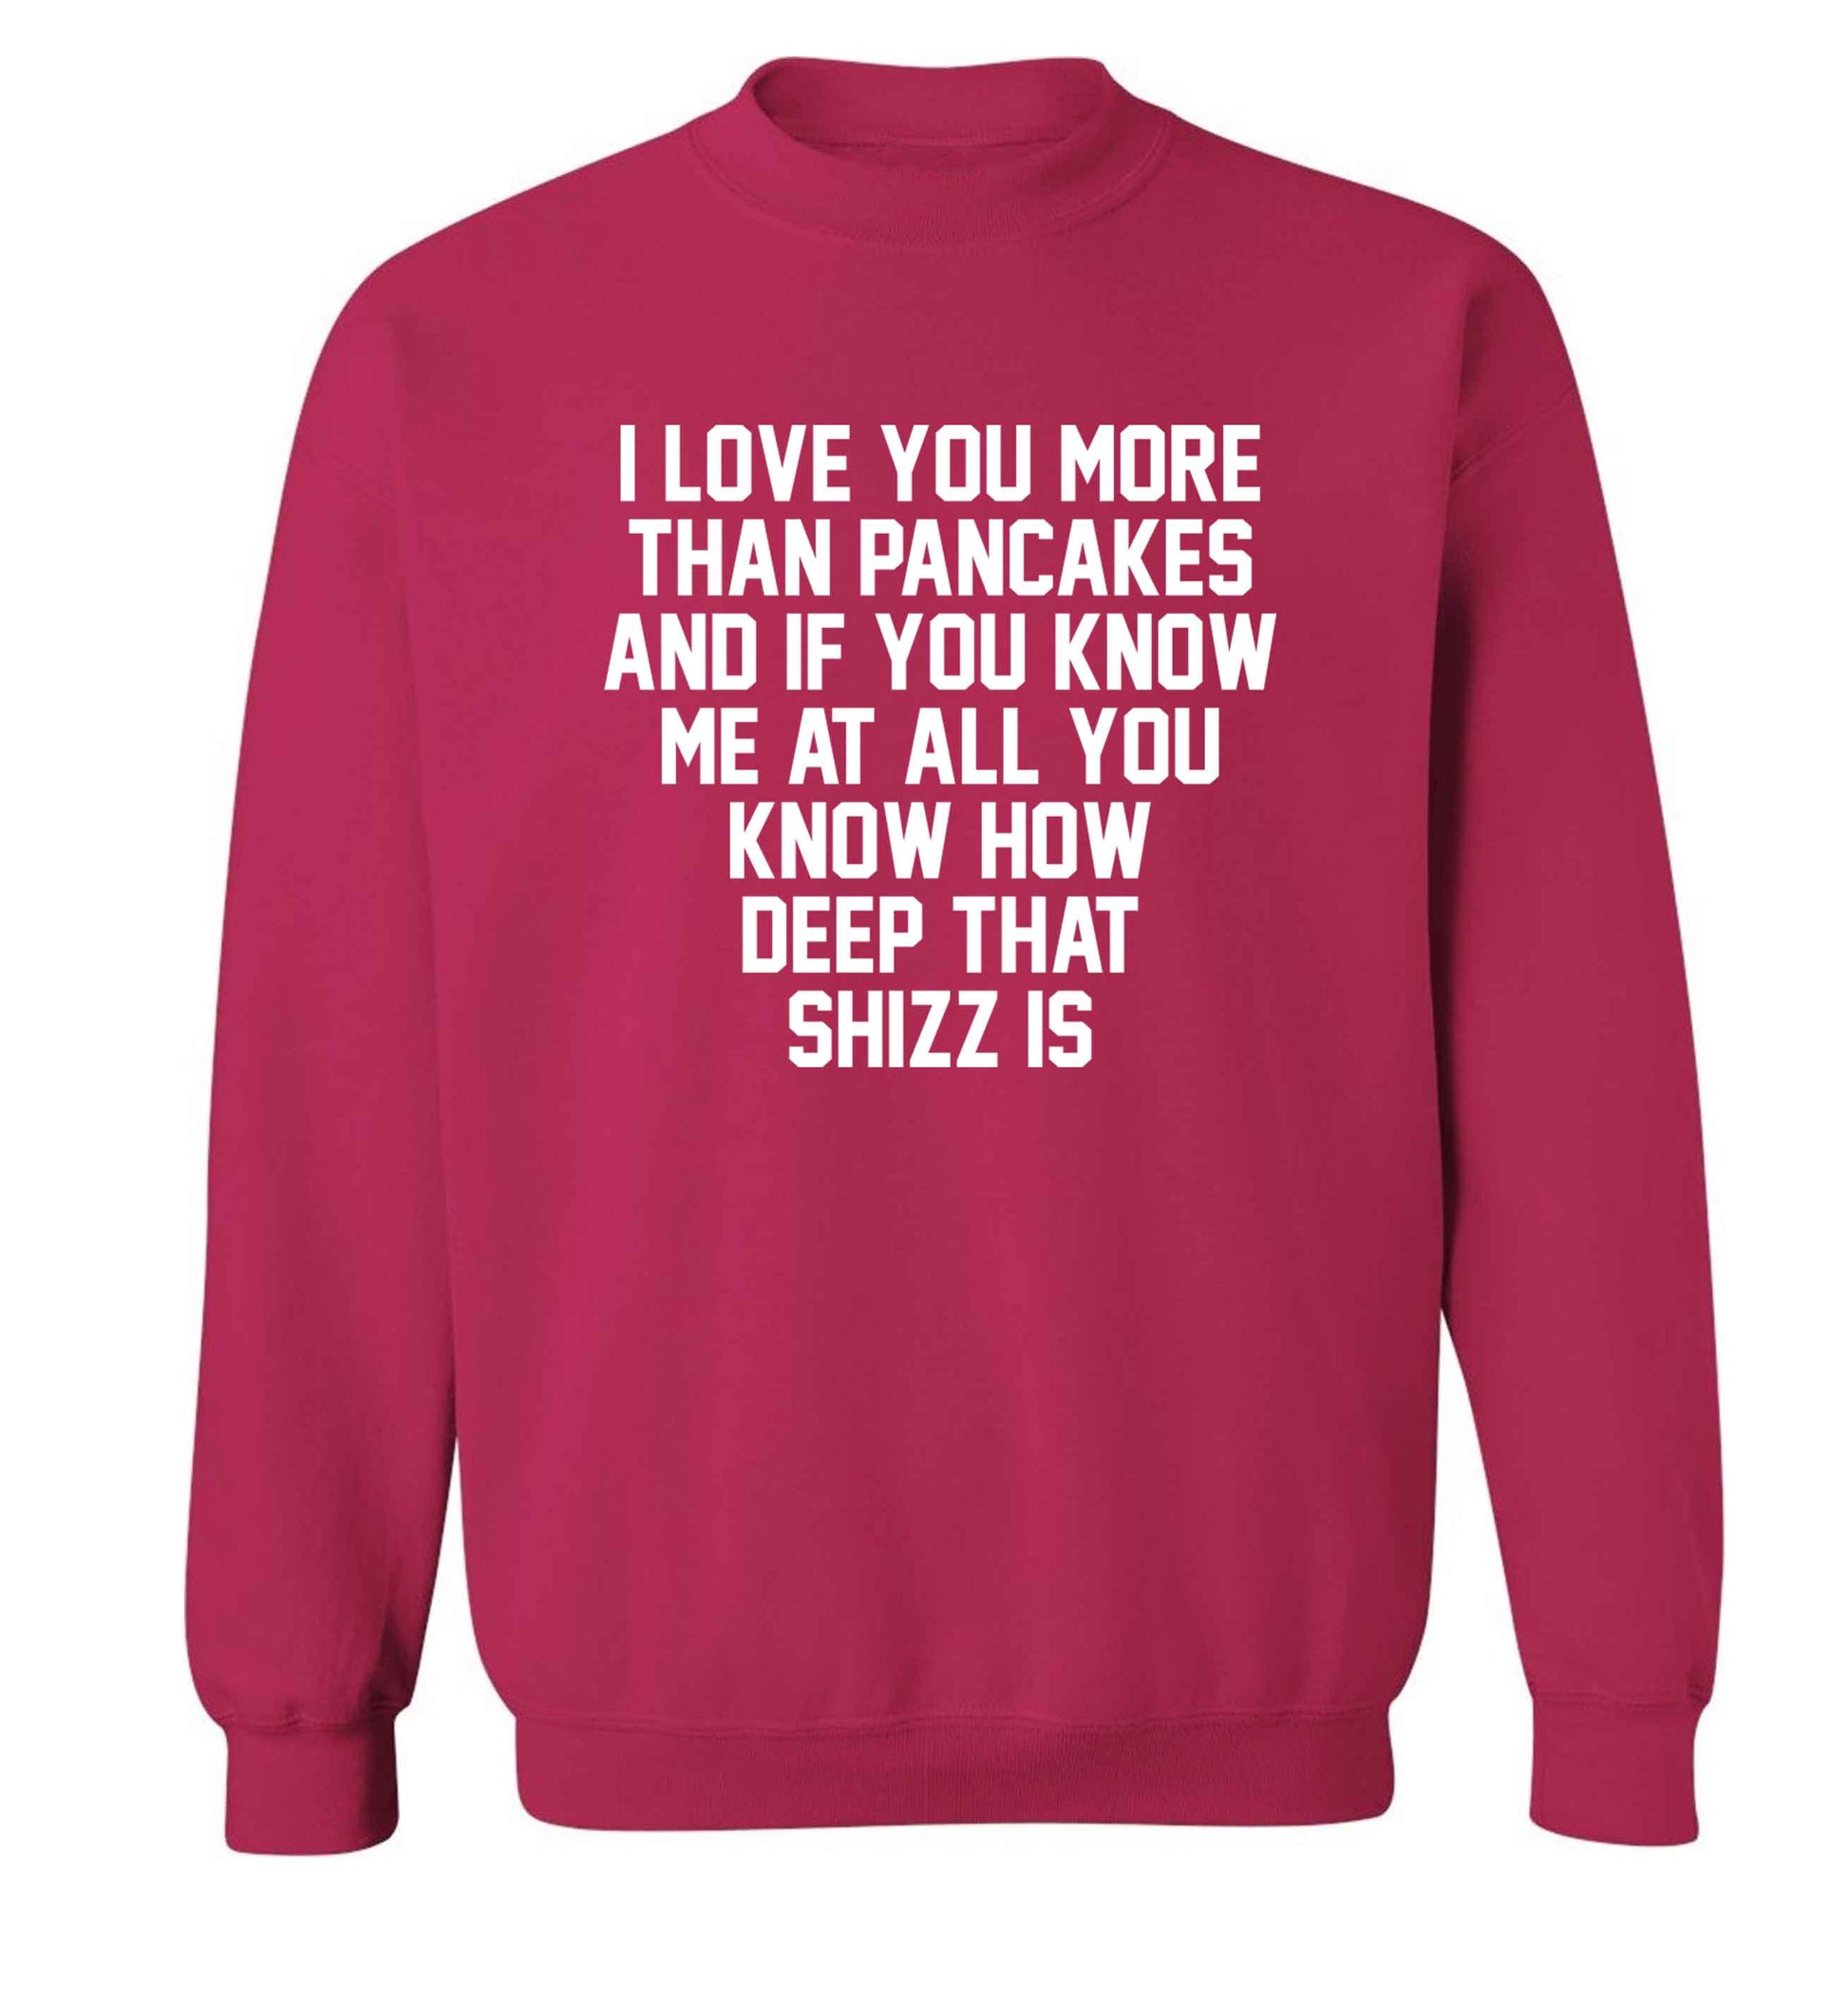 I love you more than pancakes and if you know me at all you know how deep that shizz is adult's unisex pink sweater 2XL